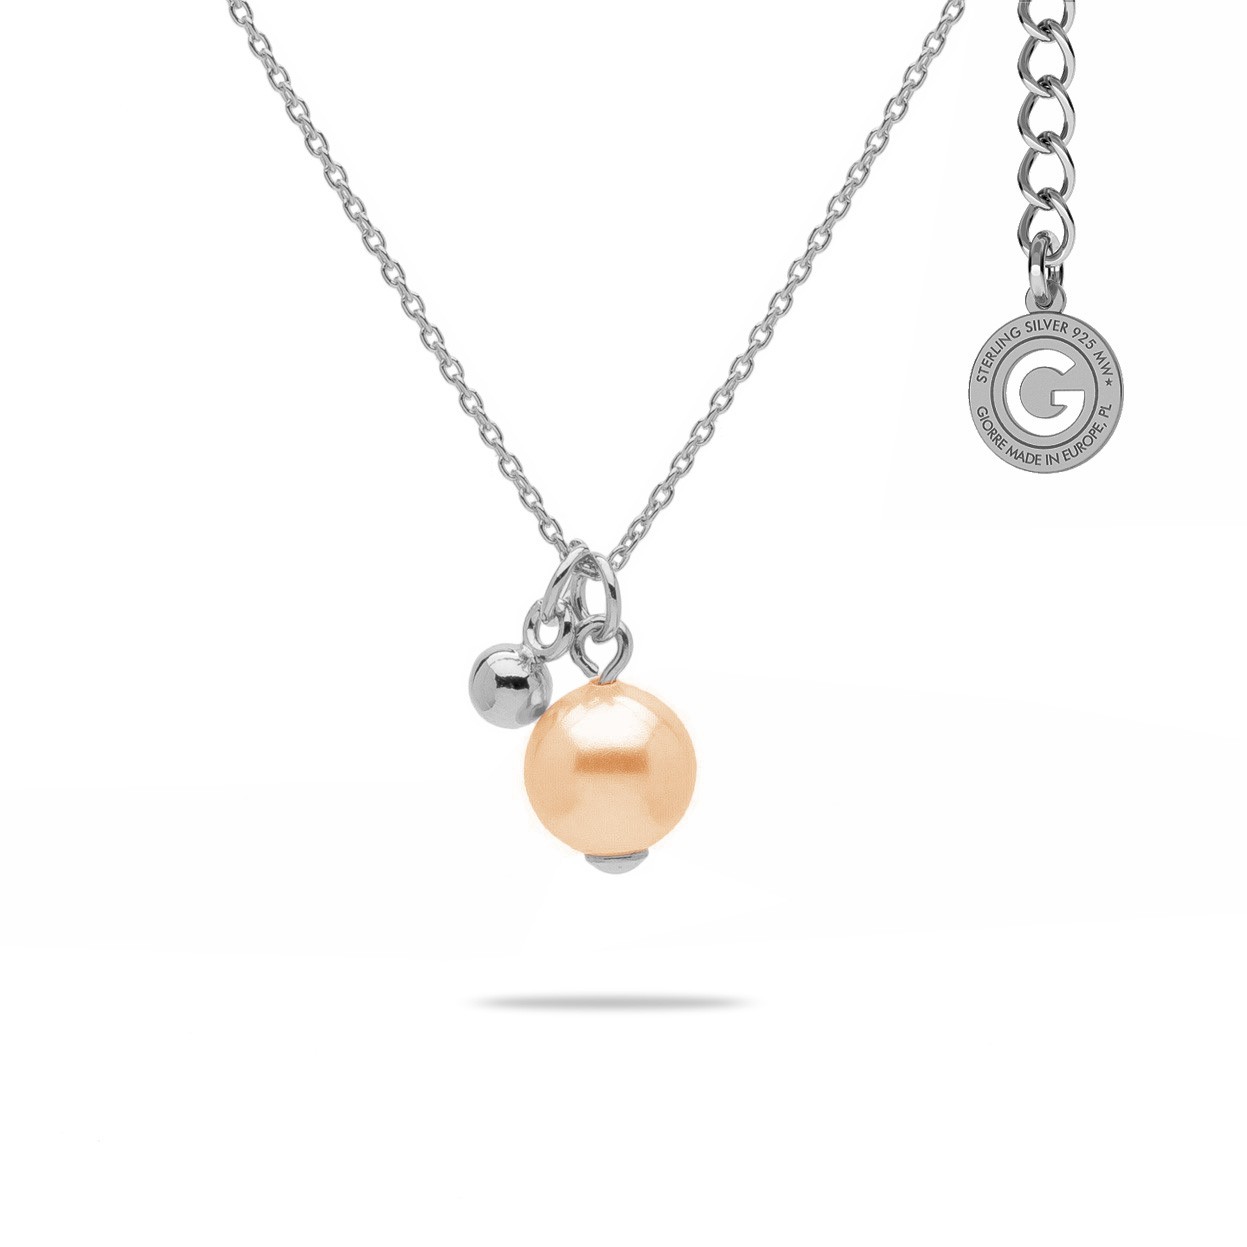 NECKLACE WITH PEARL, STERLING SILVER 925